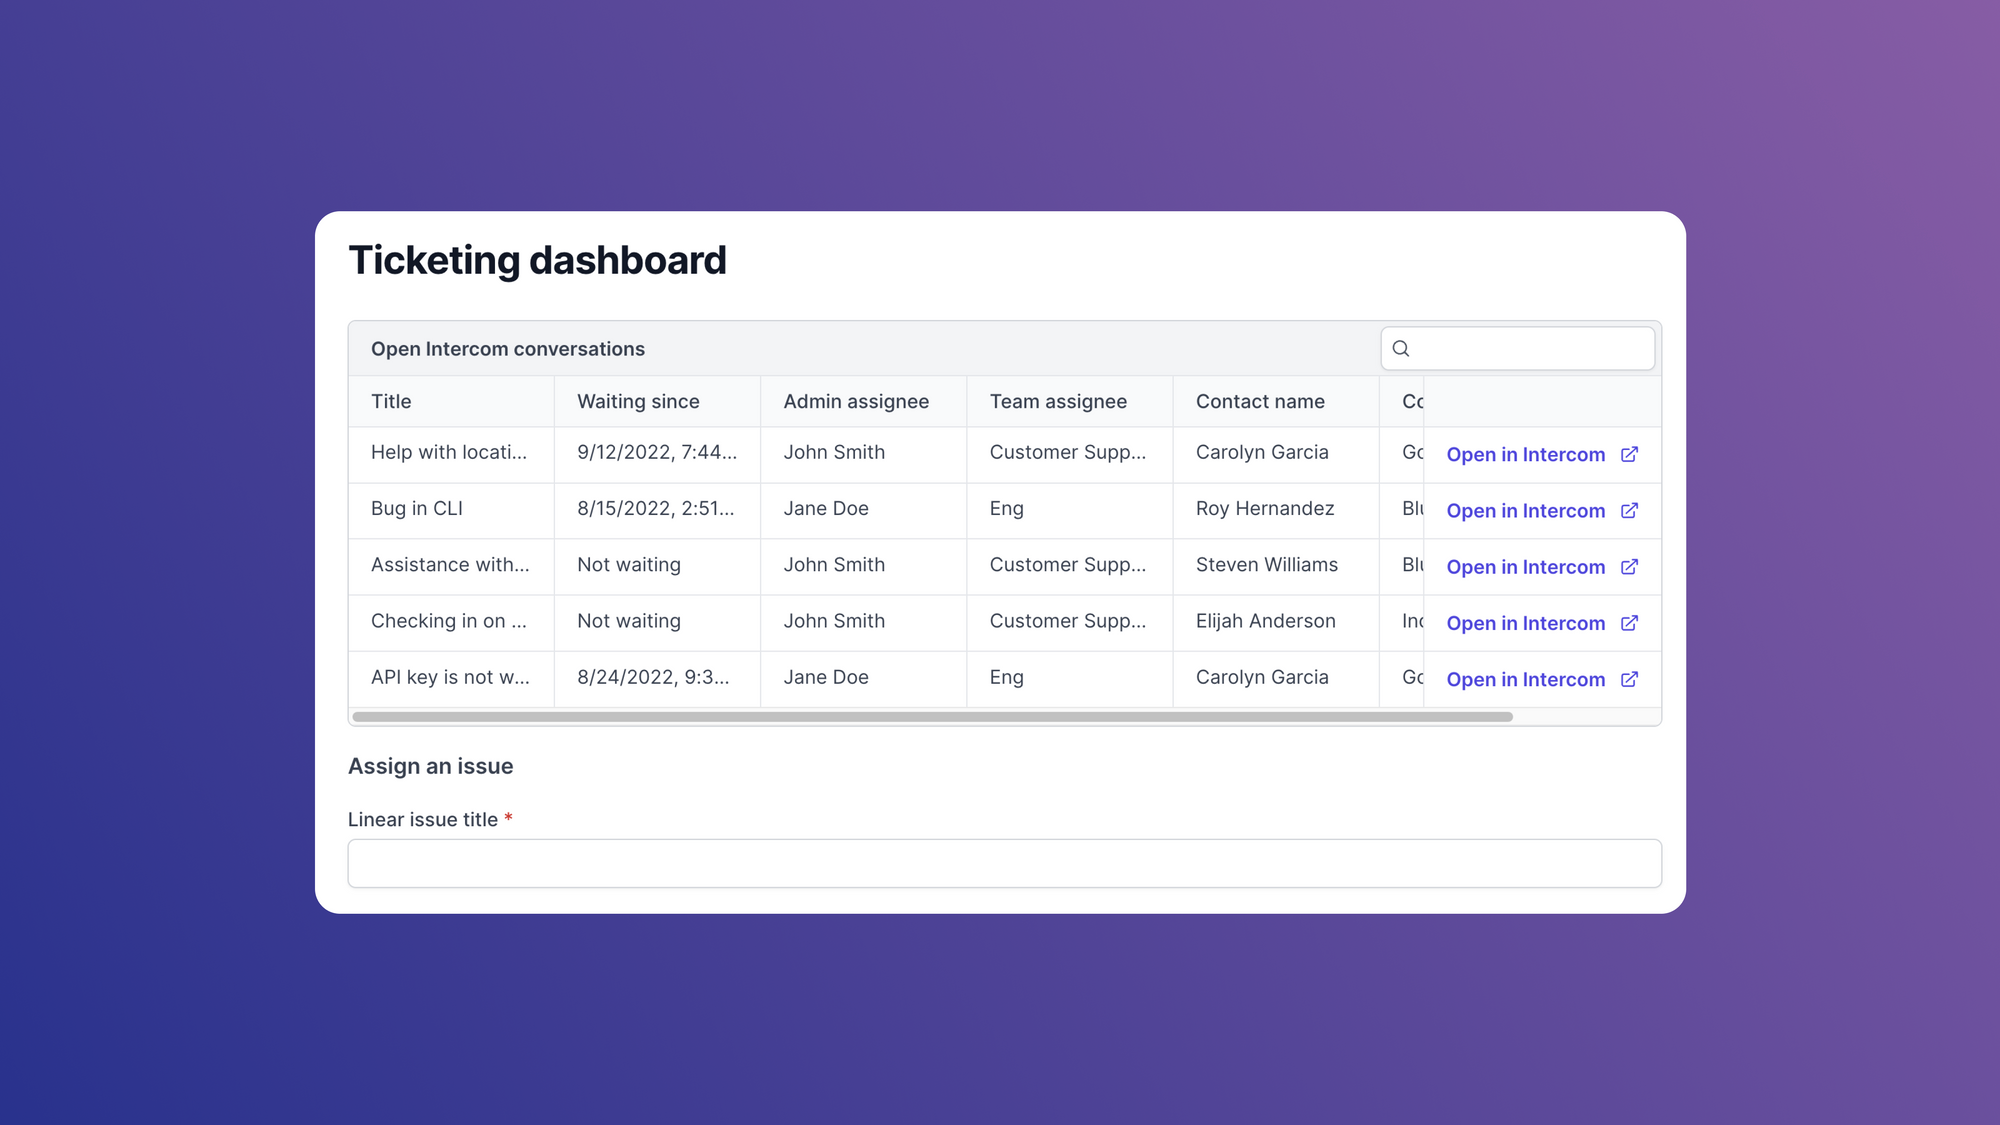 How to build a ticketing dashboard using Airplane Views